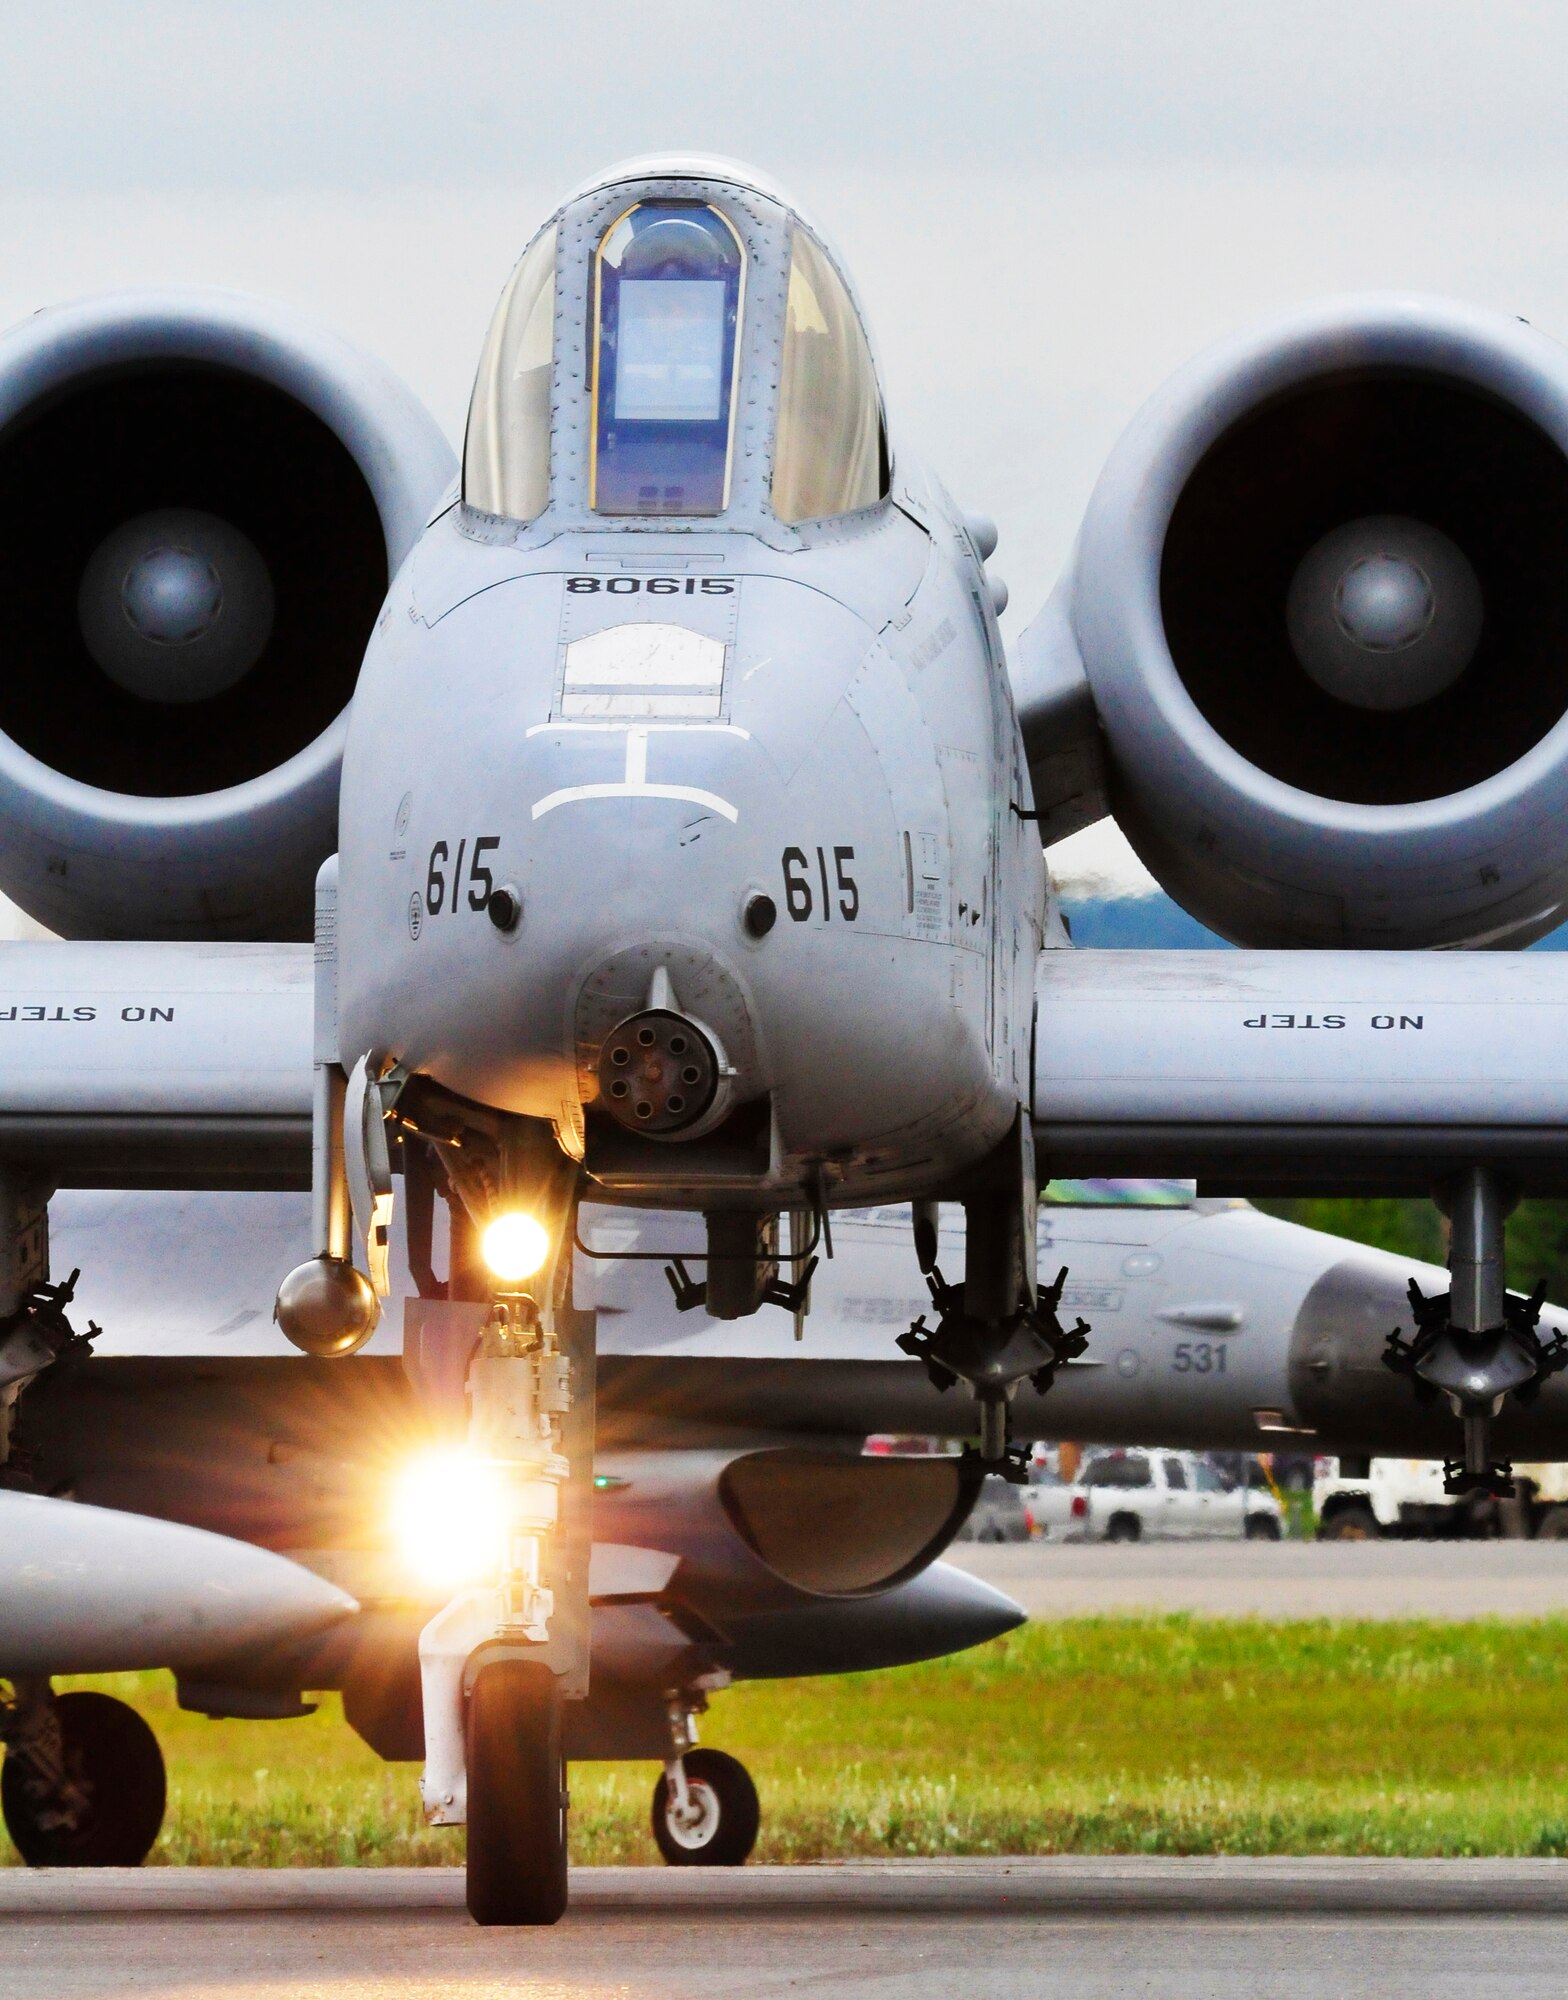 An A-10 Thunderbolt II taxis on the runway before take-off during RED FLAG-Alaska 11-2 July 15, 2011, Eielson Air Force Base, Alaska.  RF-A, a two week long exercise, focuses on aerial combat training for U.S. and allied forces and is conducted within the Joint Pacific Alaska Range Complex, a 67,000 square mile training range.  The A-10 is assigned to the 25th Fighter Squadron at Osan Air Base, Republic of Korea. (U.S. Air Force photo/Staff Sgt. Miguel Lara III)